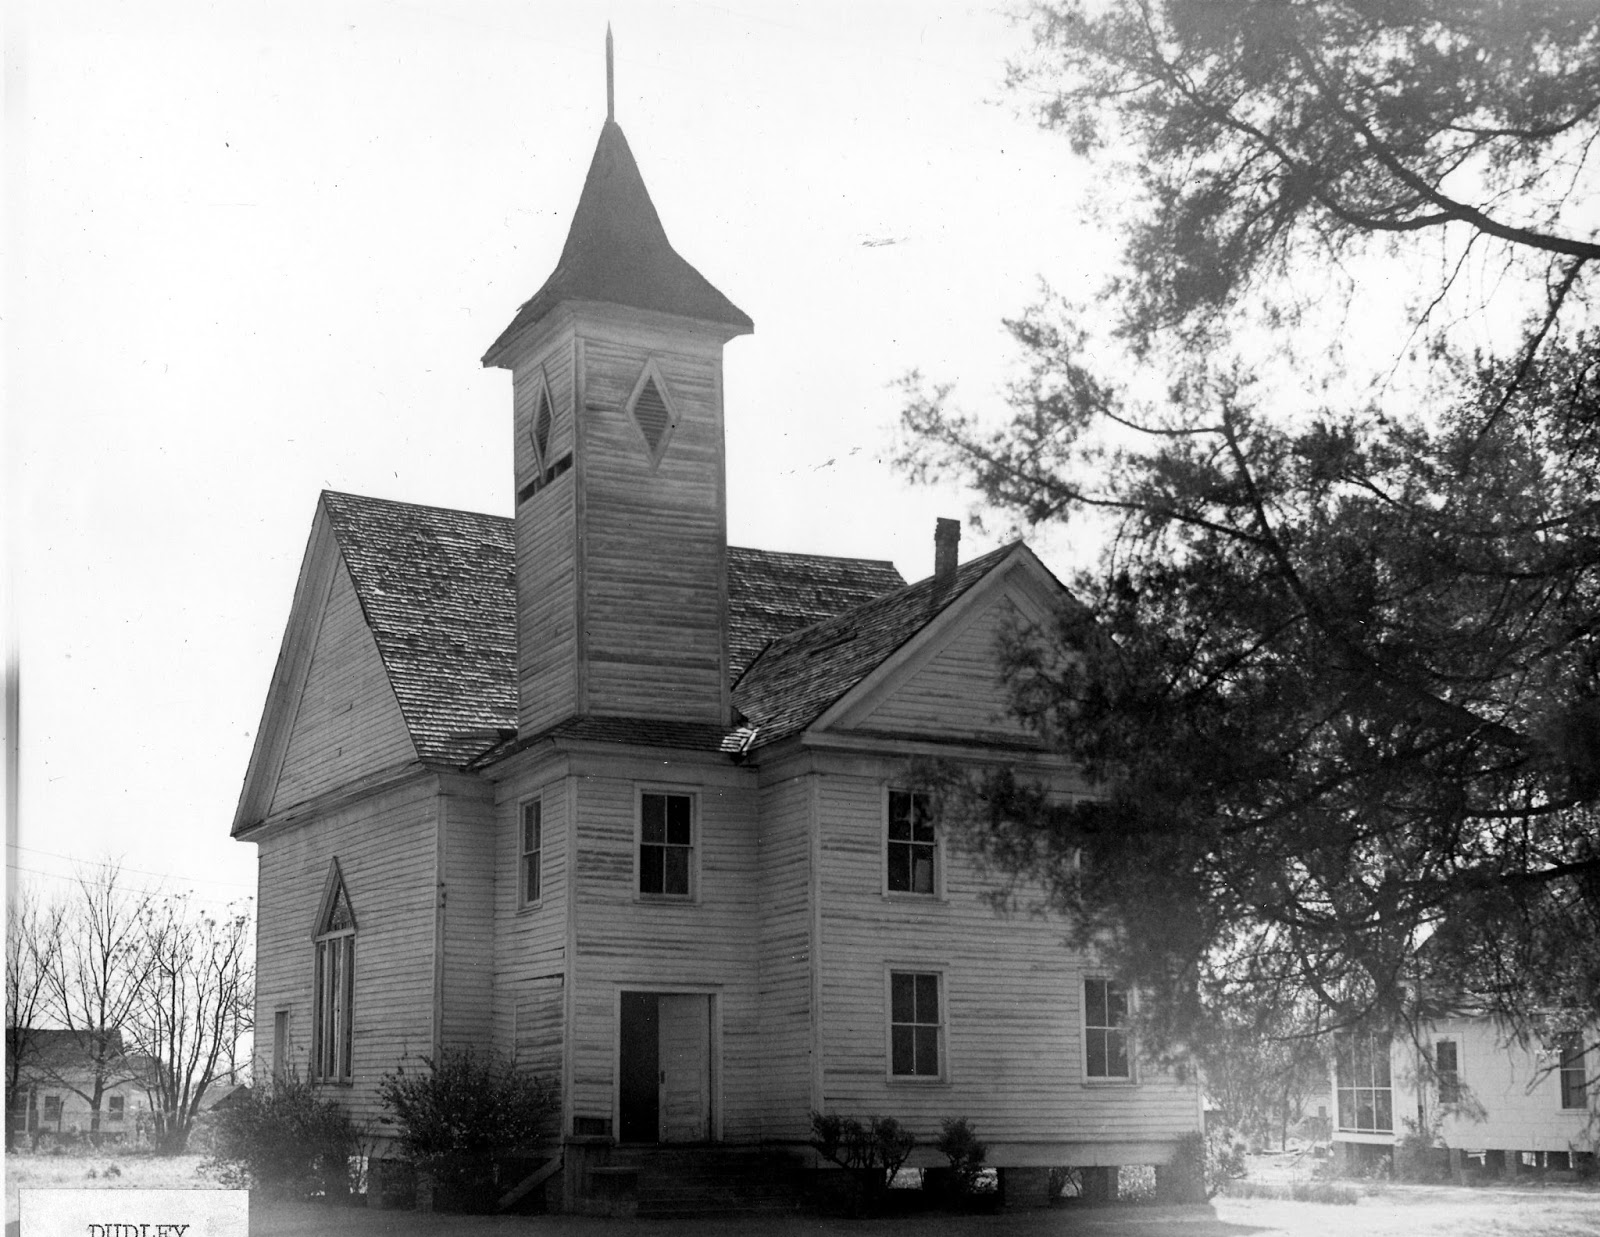 IMAGES OF OUR PAST - METHODIST CHURCH, DUDLEY, GEORGIA - CA. 1950